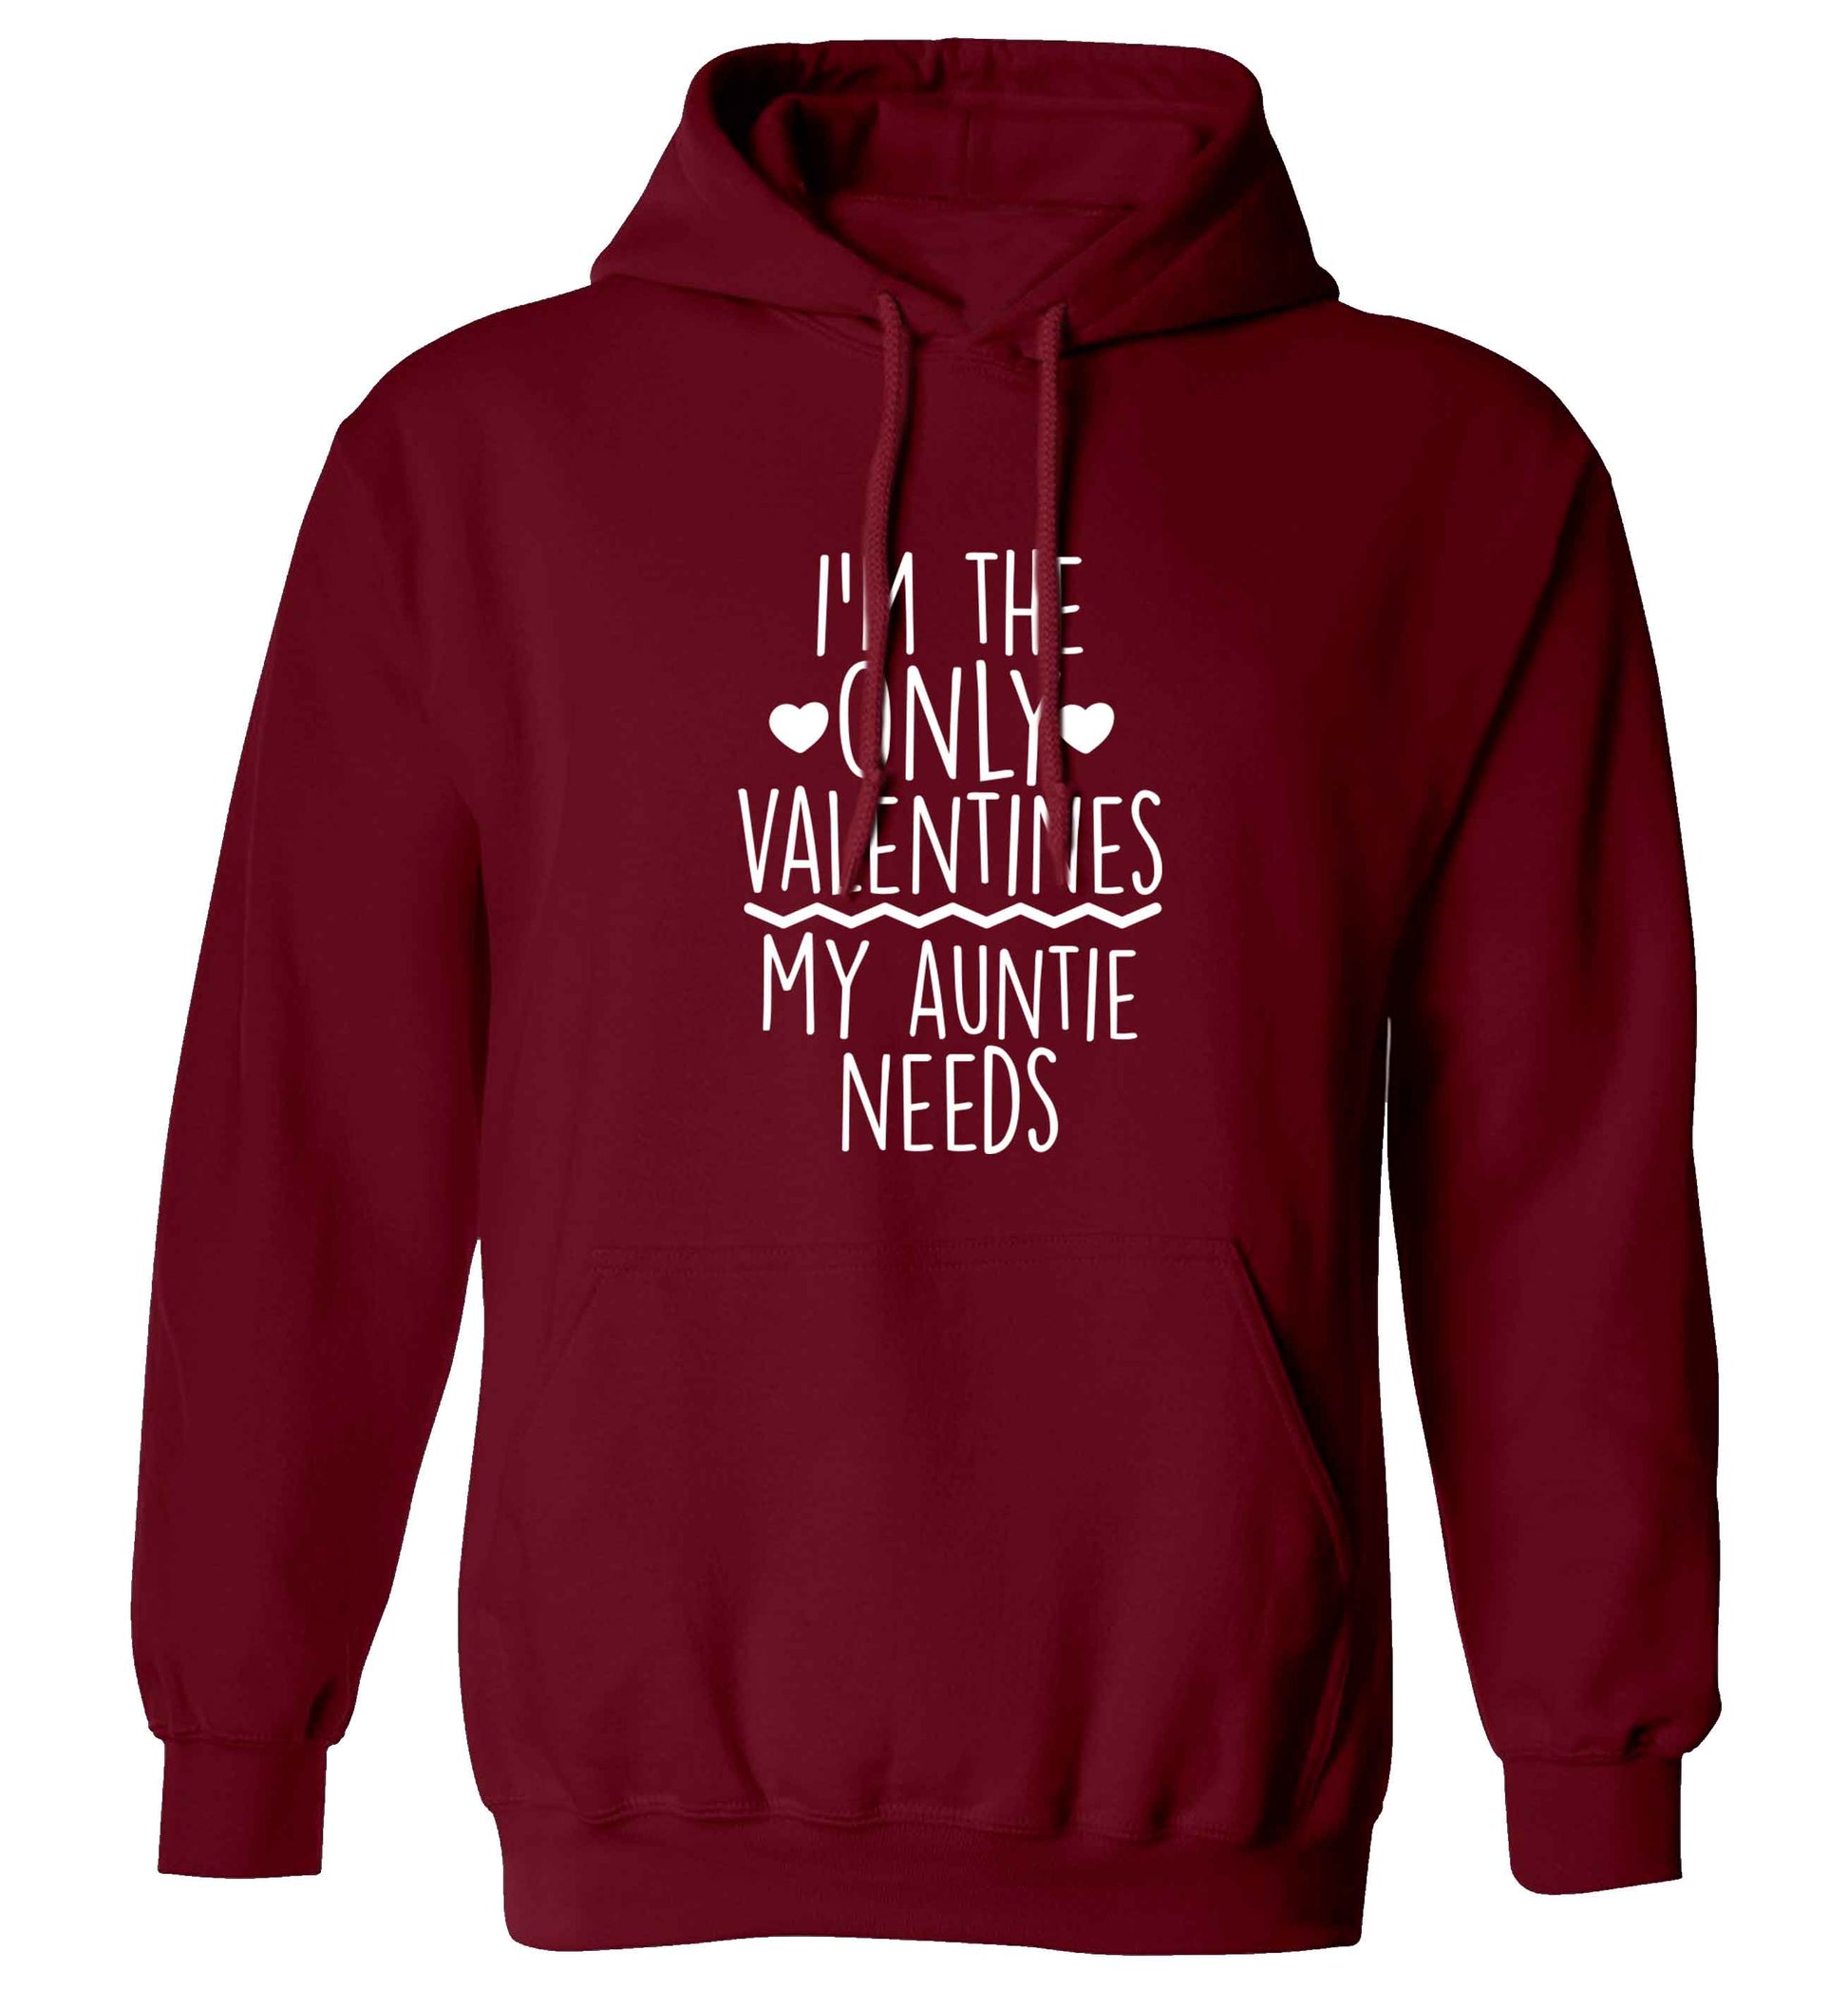 I'm the only valentines my auntie needs adults unisex maroon hoodie 2XL